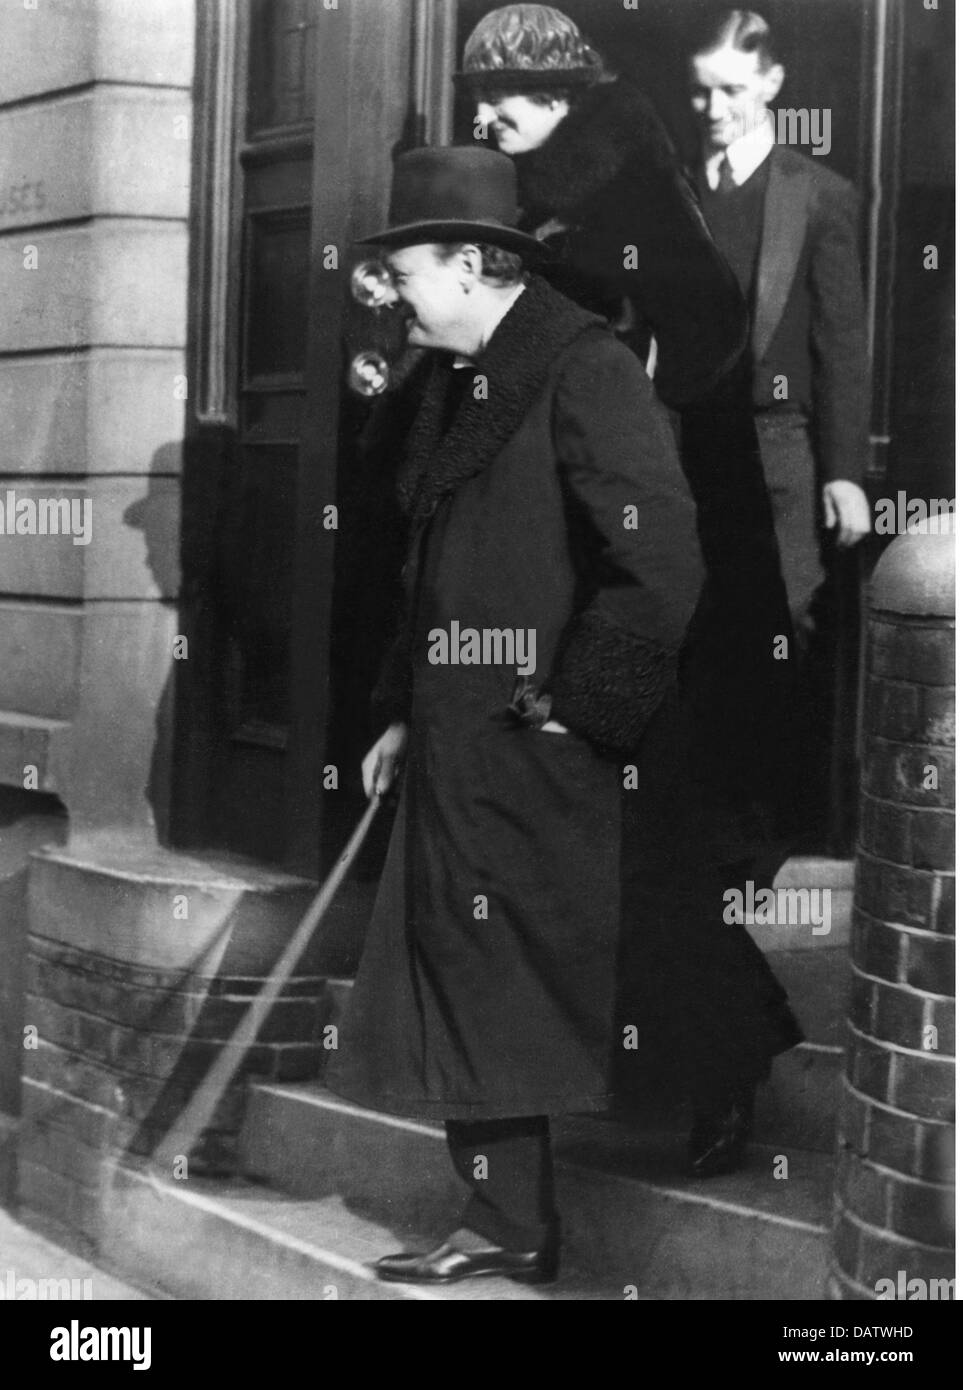 Churchill, Winston Spencer, 30.11.1874 - 24.1.1965, British politician (Cons.), full length, with wife Clementine, 1915, Stock Photo